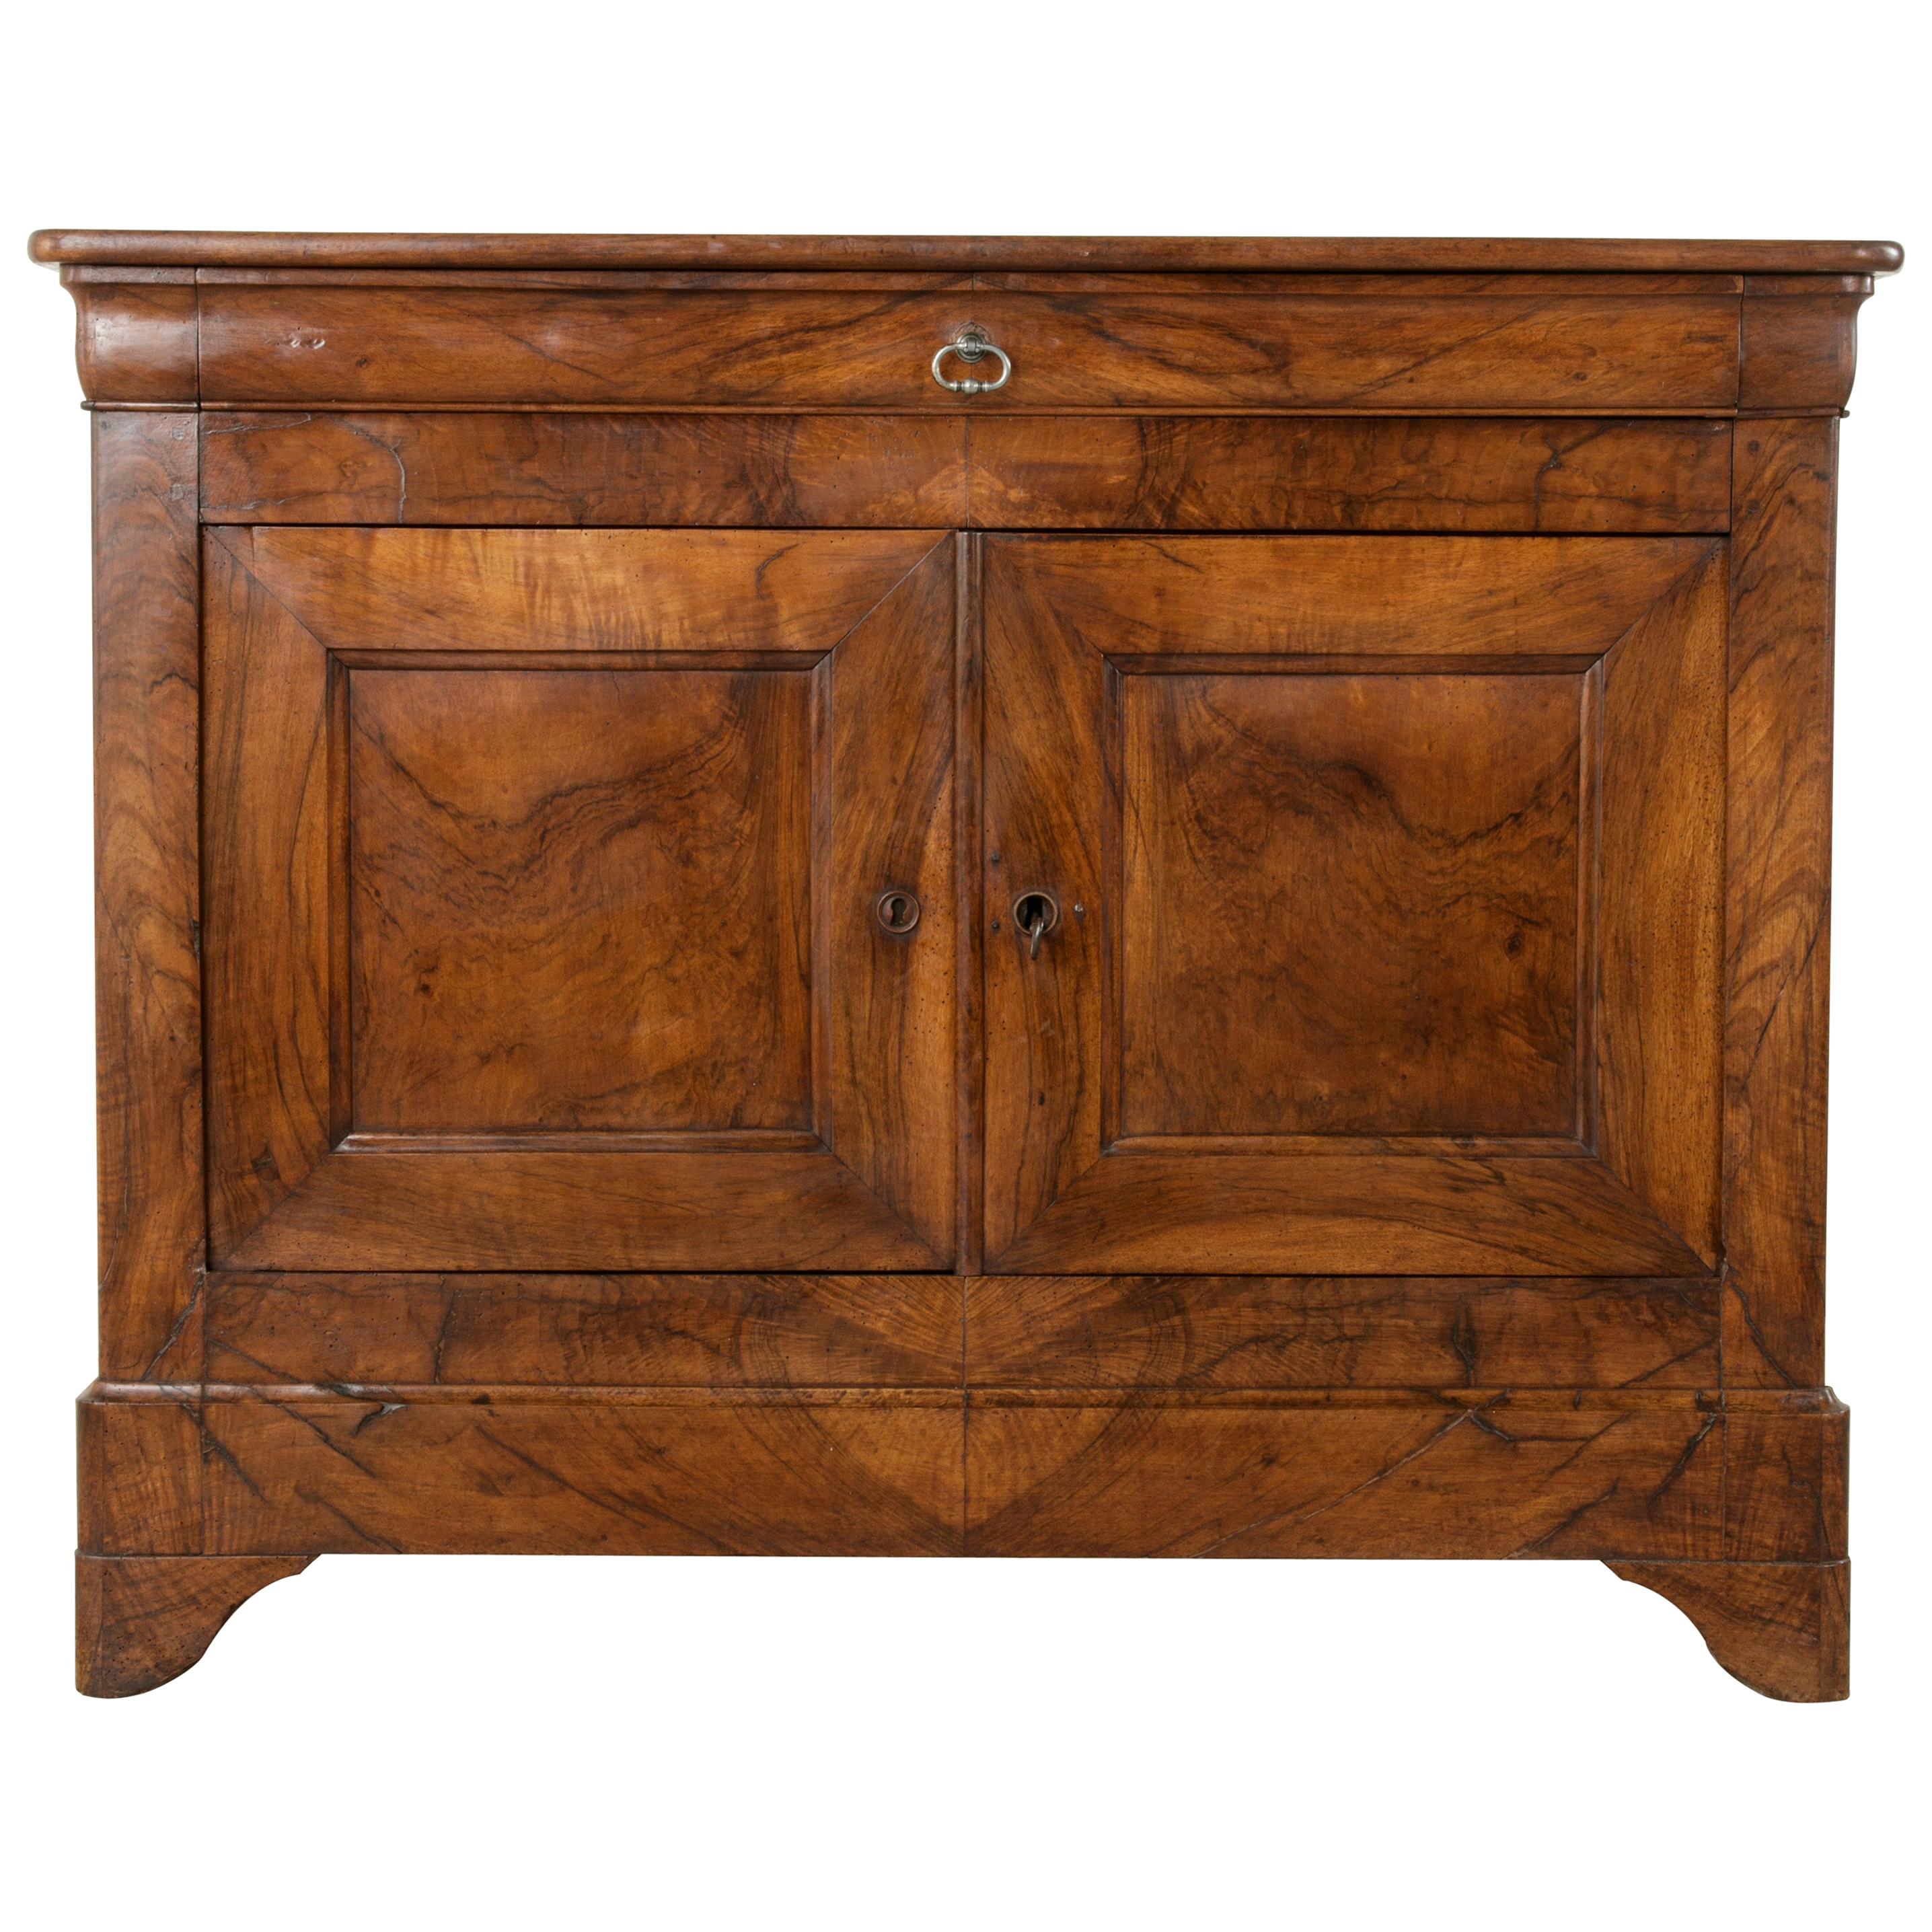 19th Century French Louis Philippe Period Burl Walnut Buffet or Sideboard